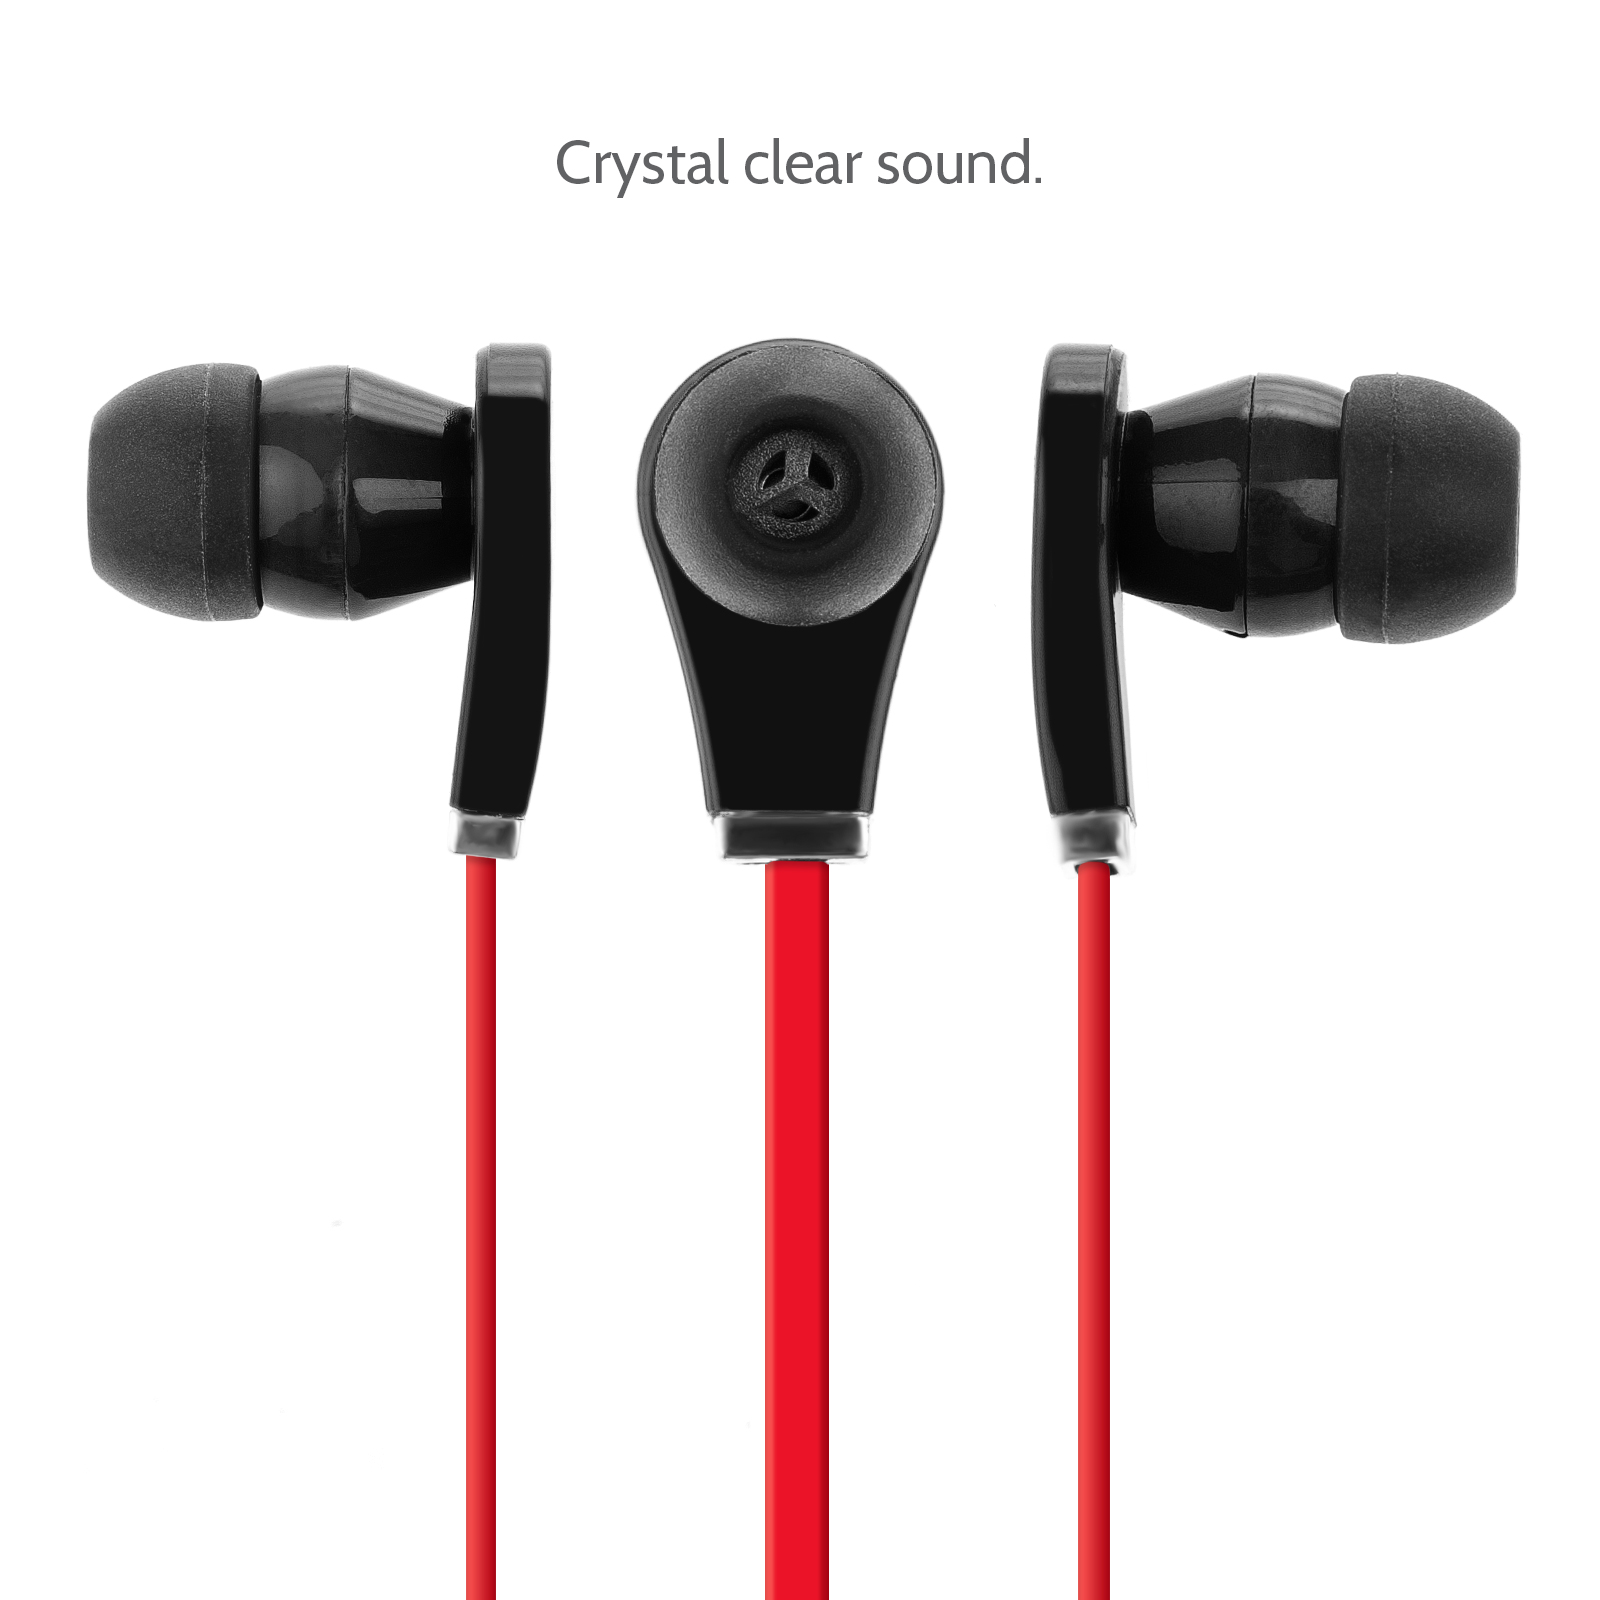 Audiance B1 Ear-Buds - Red Cable